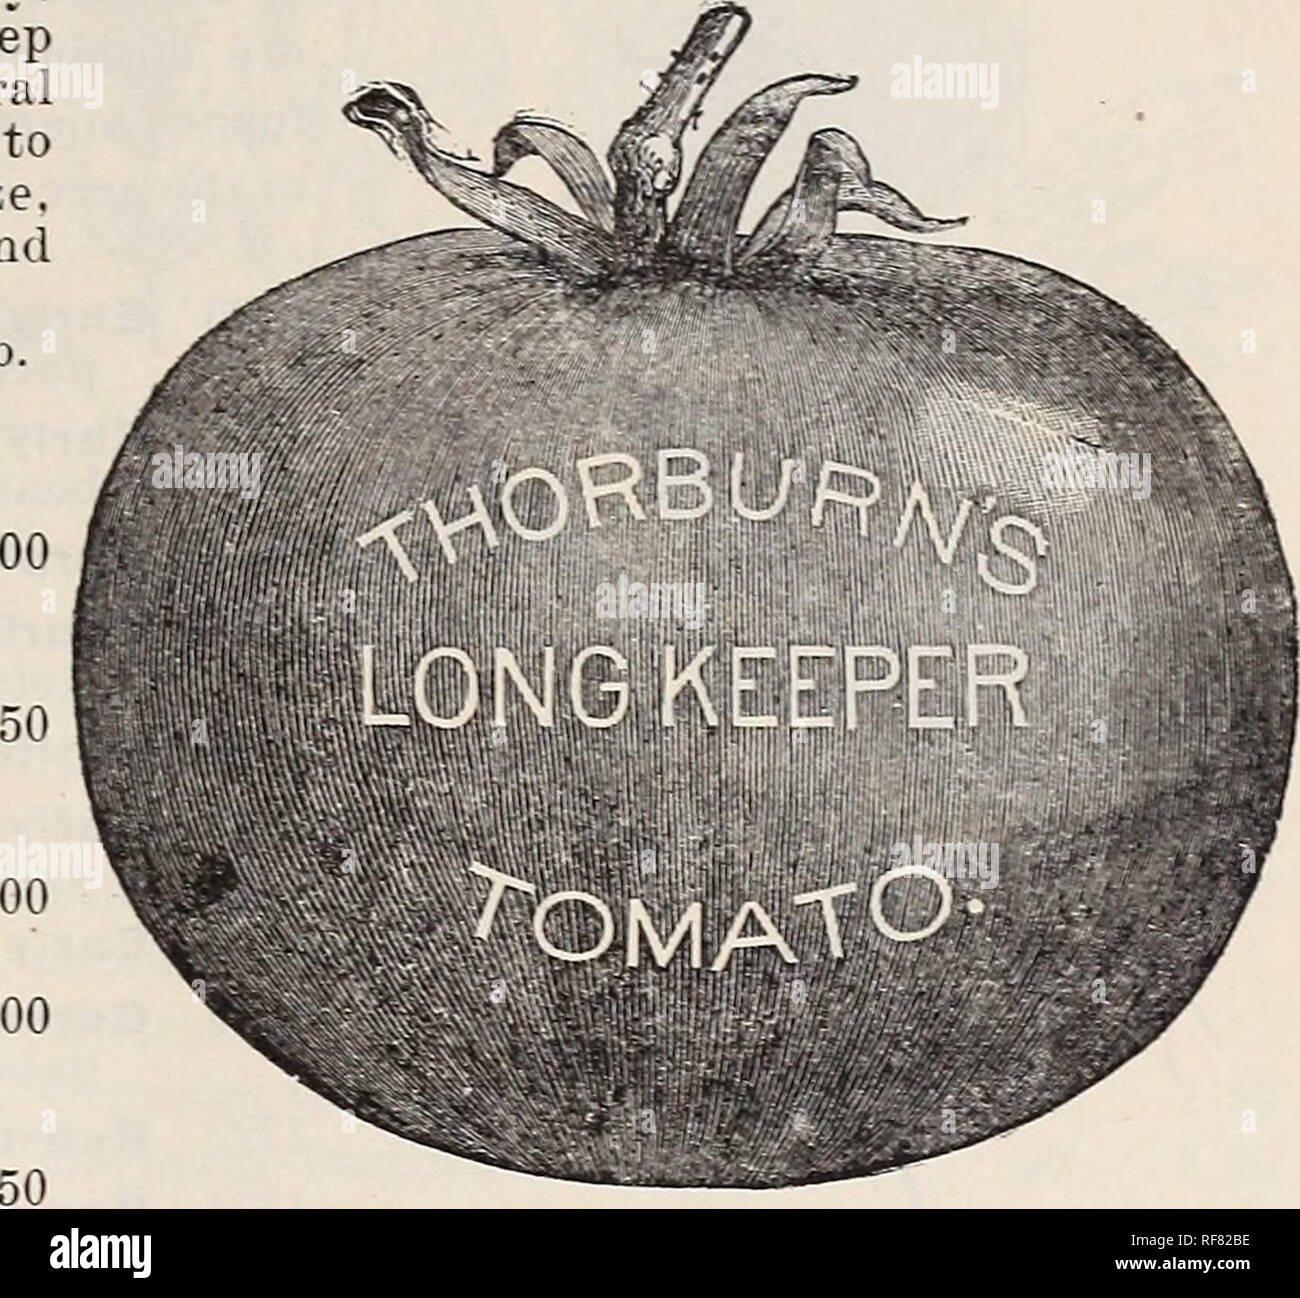 . Thorburn's seeds : 1900. Nursery stock New York (State) Catalogs; Seeds Catalogs; Vegetables Seeds Catalogs; Flowers Seeds Catalogs. Catalogue of High-Class Seeds- 41 TOMATO. Tomato. Tomates. SieBc§ai)feI. is warm and Mlb. Lb. $1 50 35 1 00 1617 1618 1619 1621 1622 1623 1624 1625 1626 1627 1628 1629 1630 1631 1632 1633 1634 1635 1636 1638 1640 1641 1642 1643 1645 1646 1647 1648 1649 1650 1651 1653 1654 1656 1657 1659 1660 1G64 1668 1675 1676 1678 1682 1685 30 40 85 1 25. lai Culture. —Sow in a hotbed in early spring, or the seed may be sown in shallow boxes and placed in a window, when one d Stock Photo